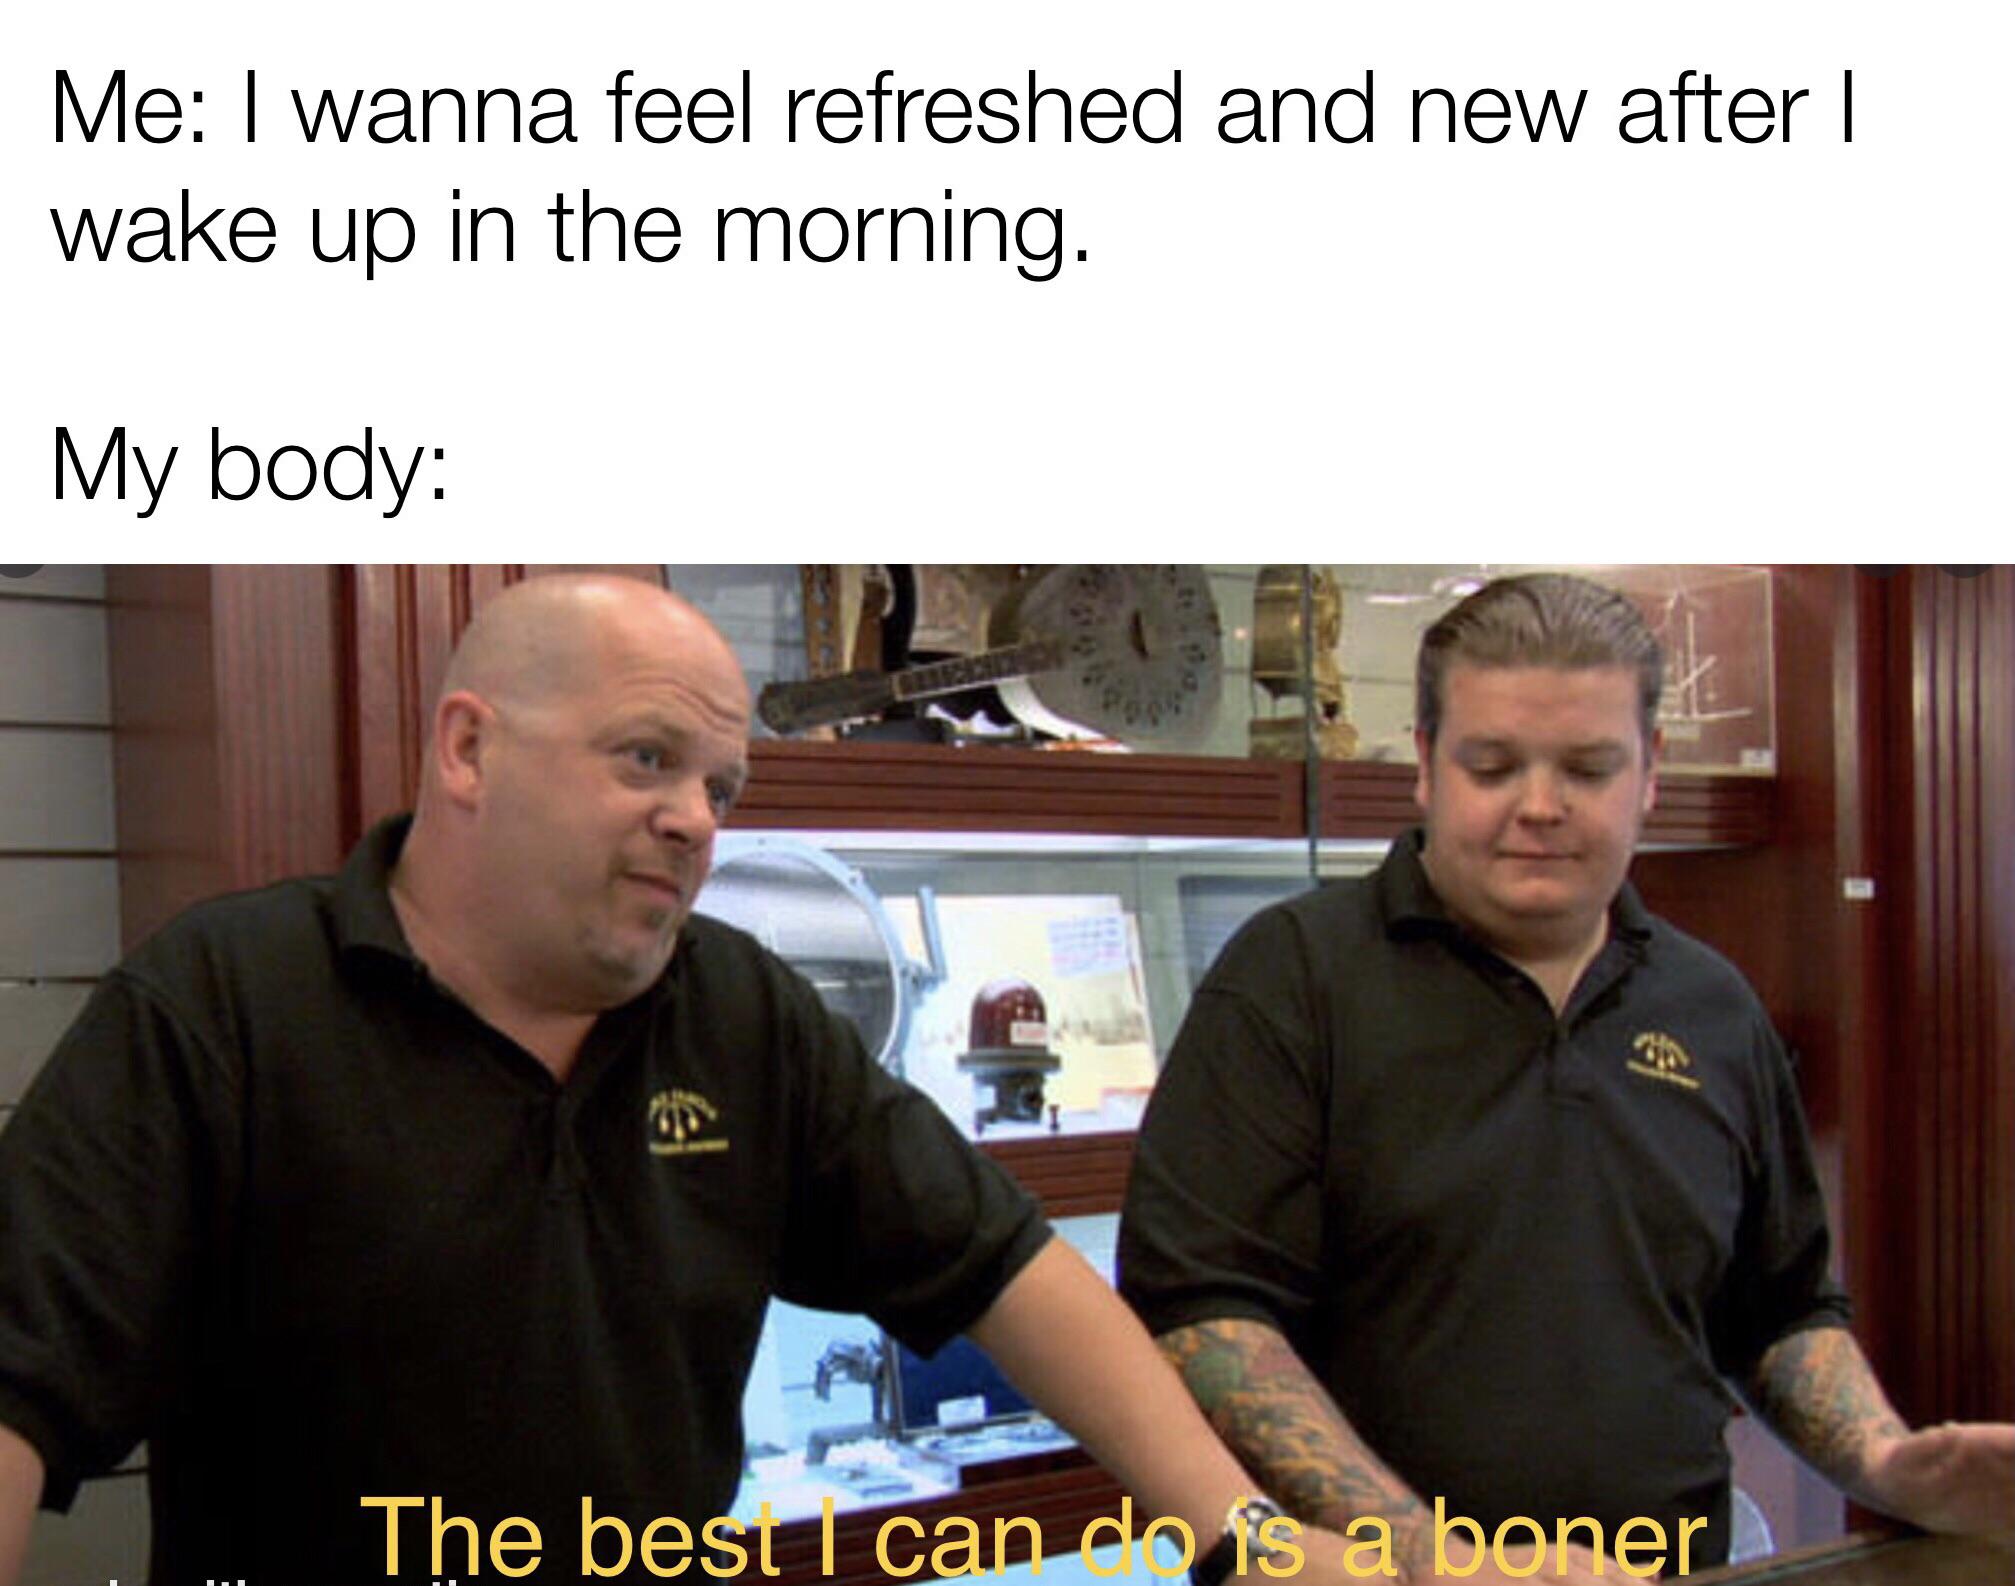 best i can do meme - Me I wanna feel refreshed and new after | wake up in the morning. My body & Od The best I can do is a boner